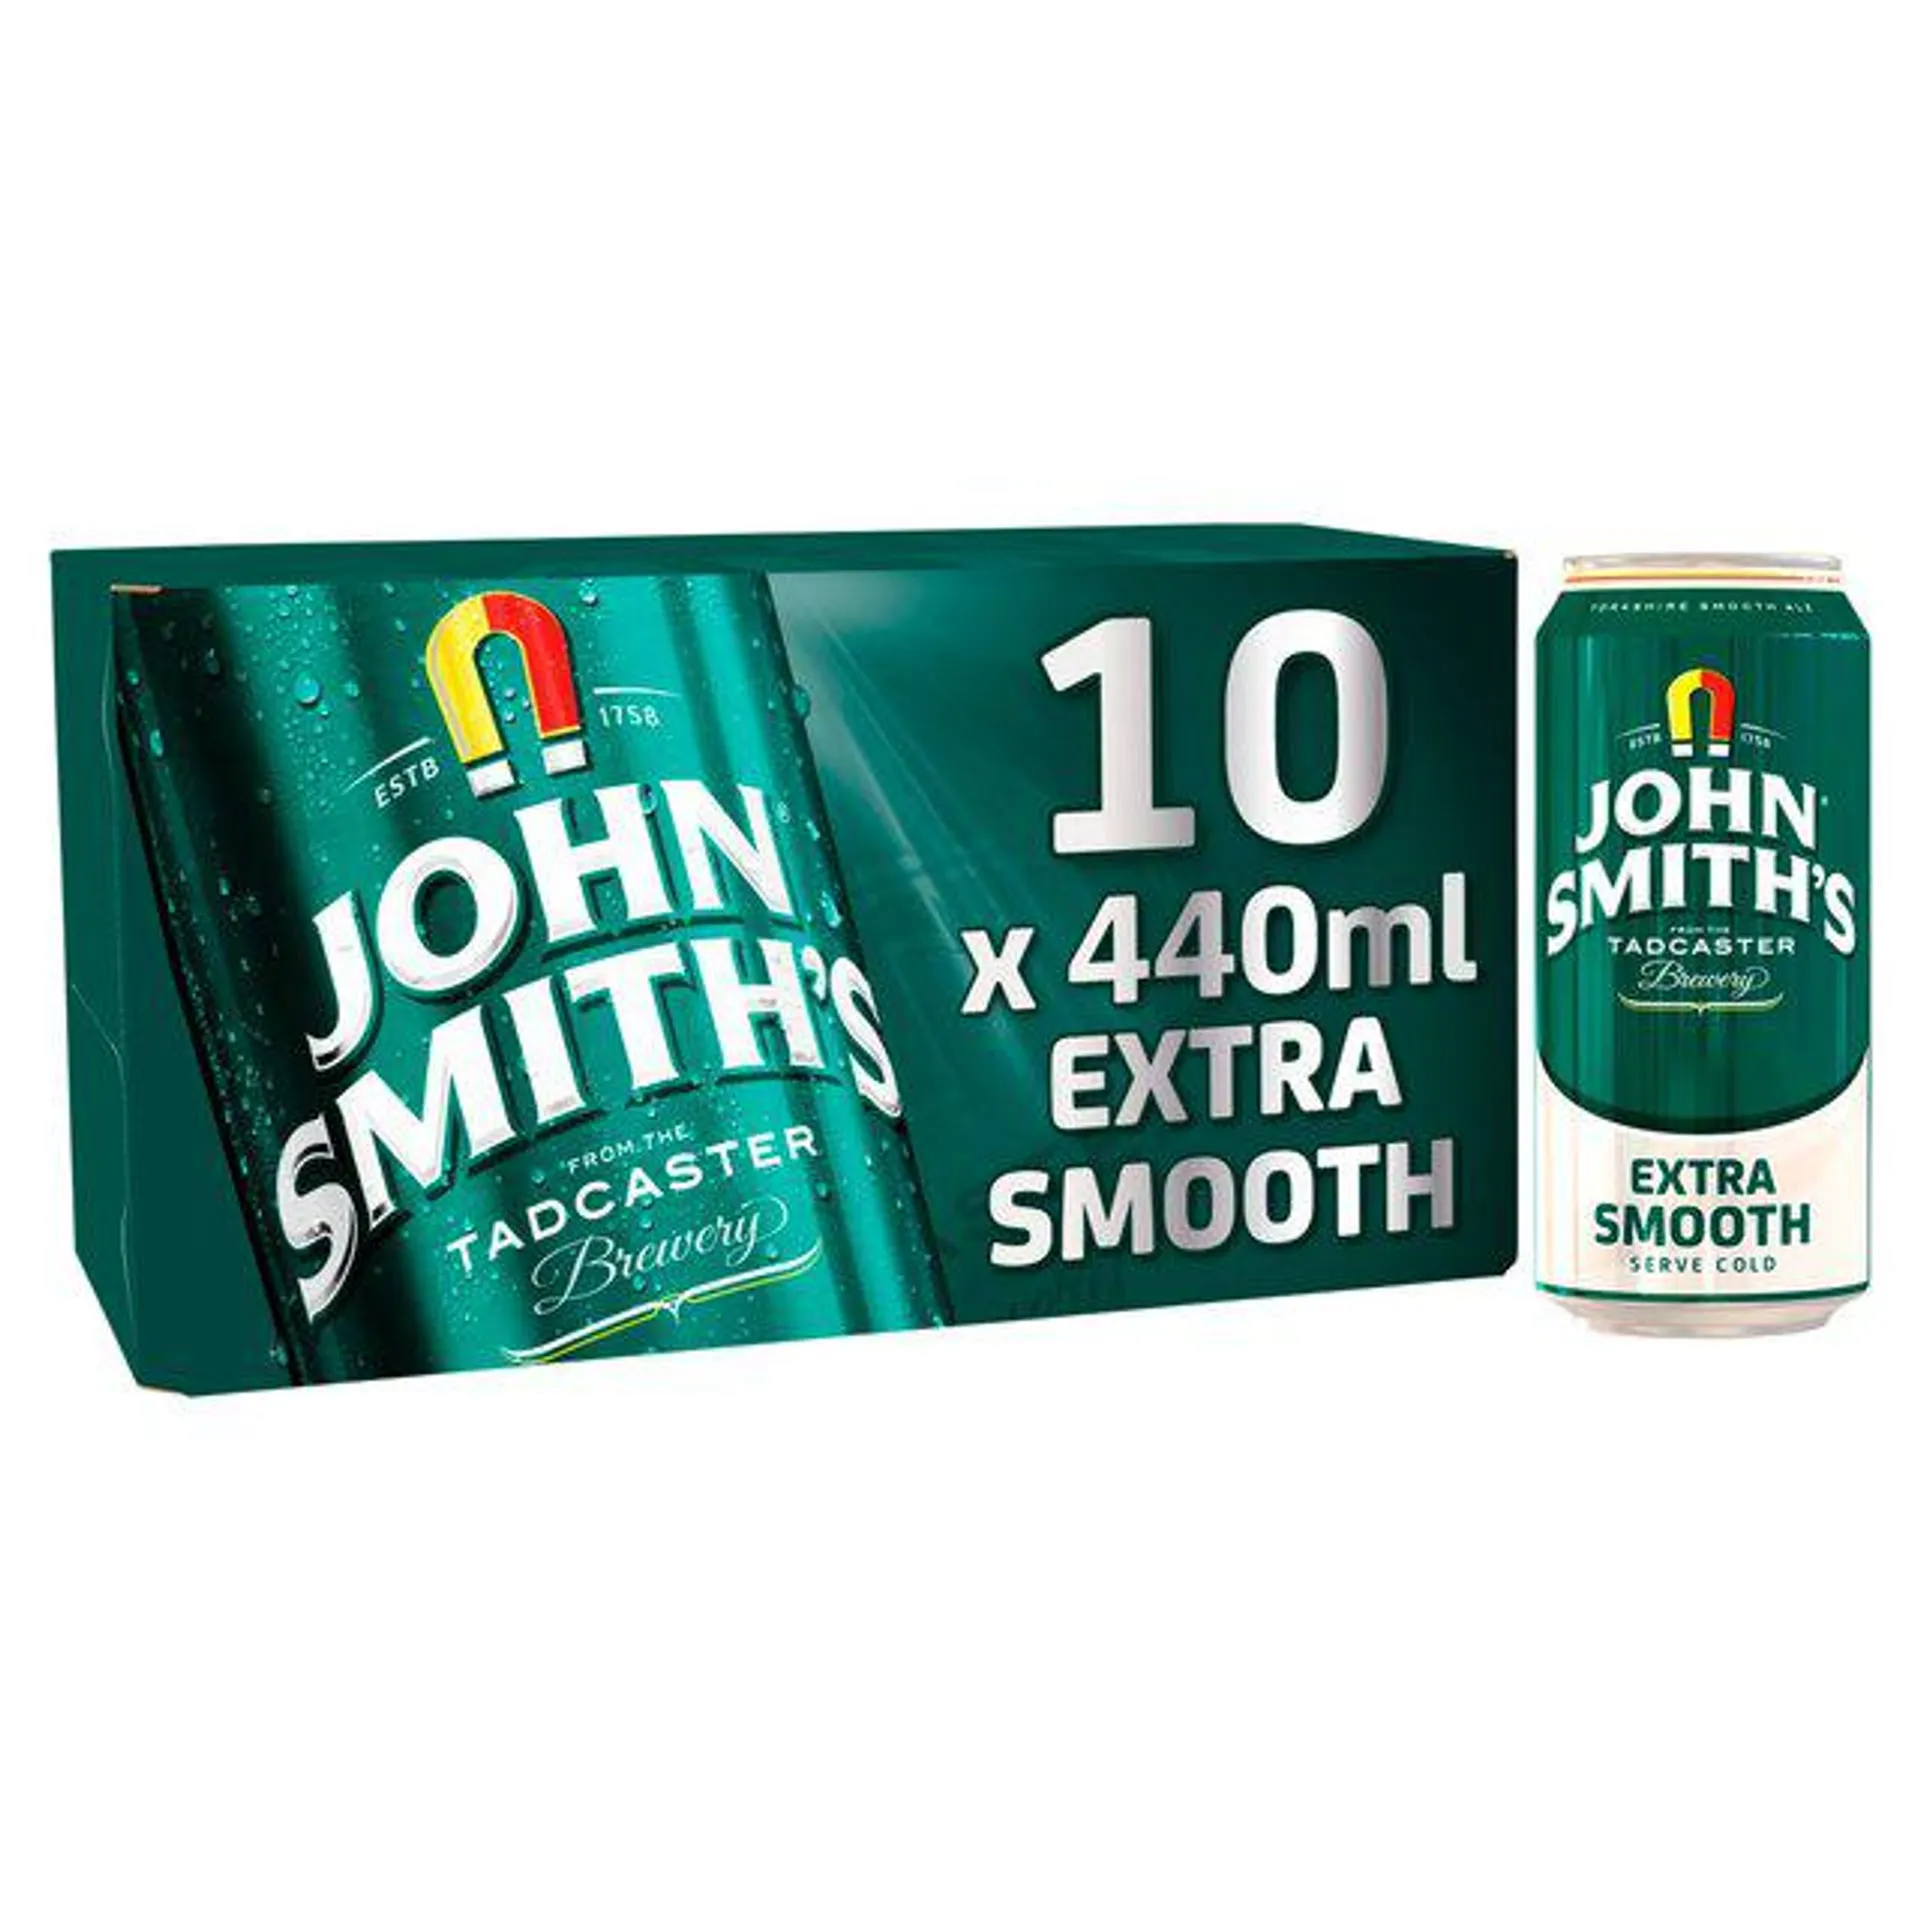 John Smith's 10 Extra Smooth Cans 10 x 440ml